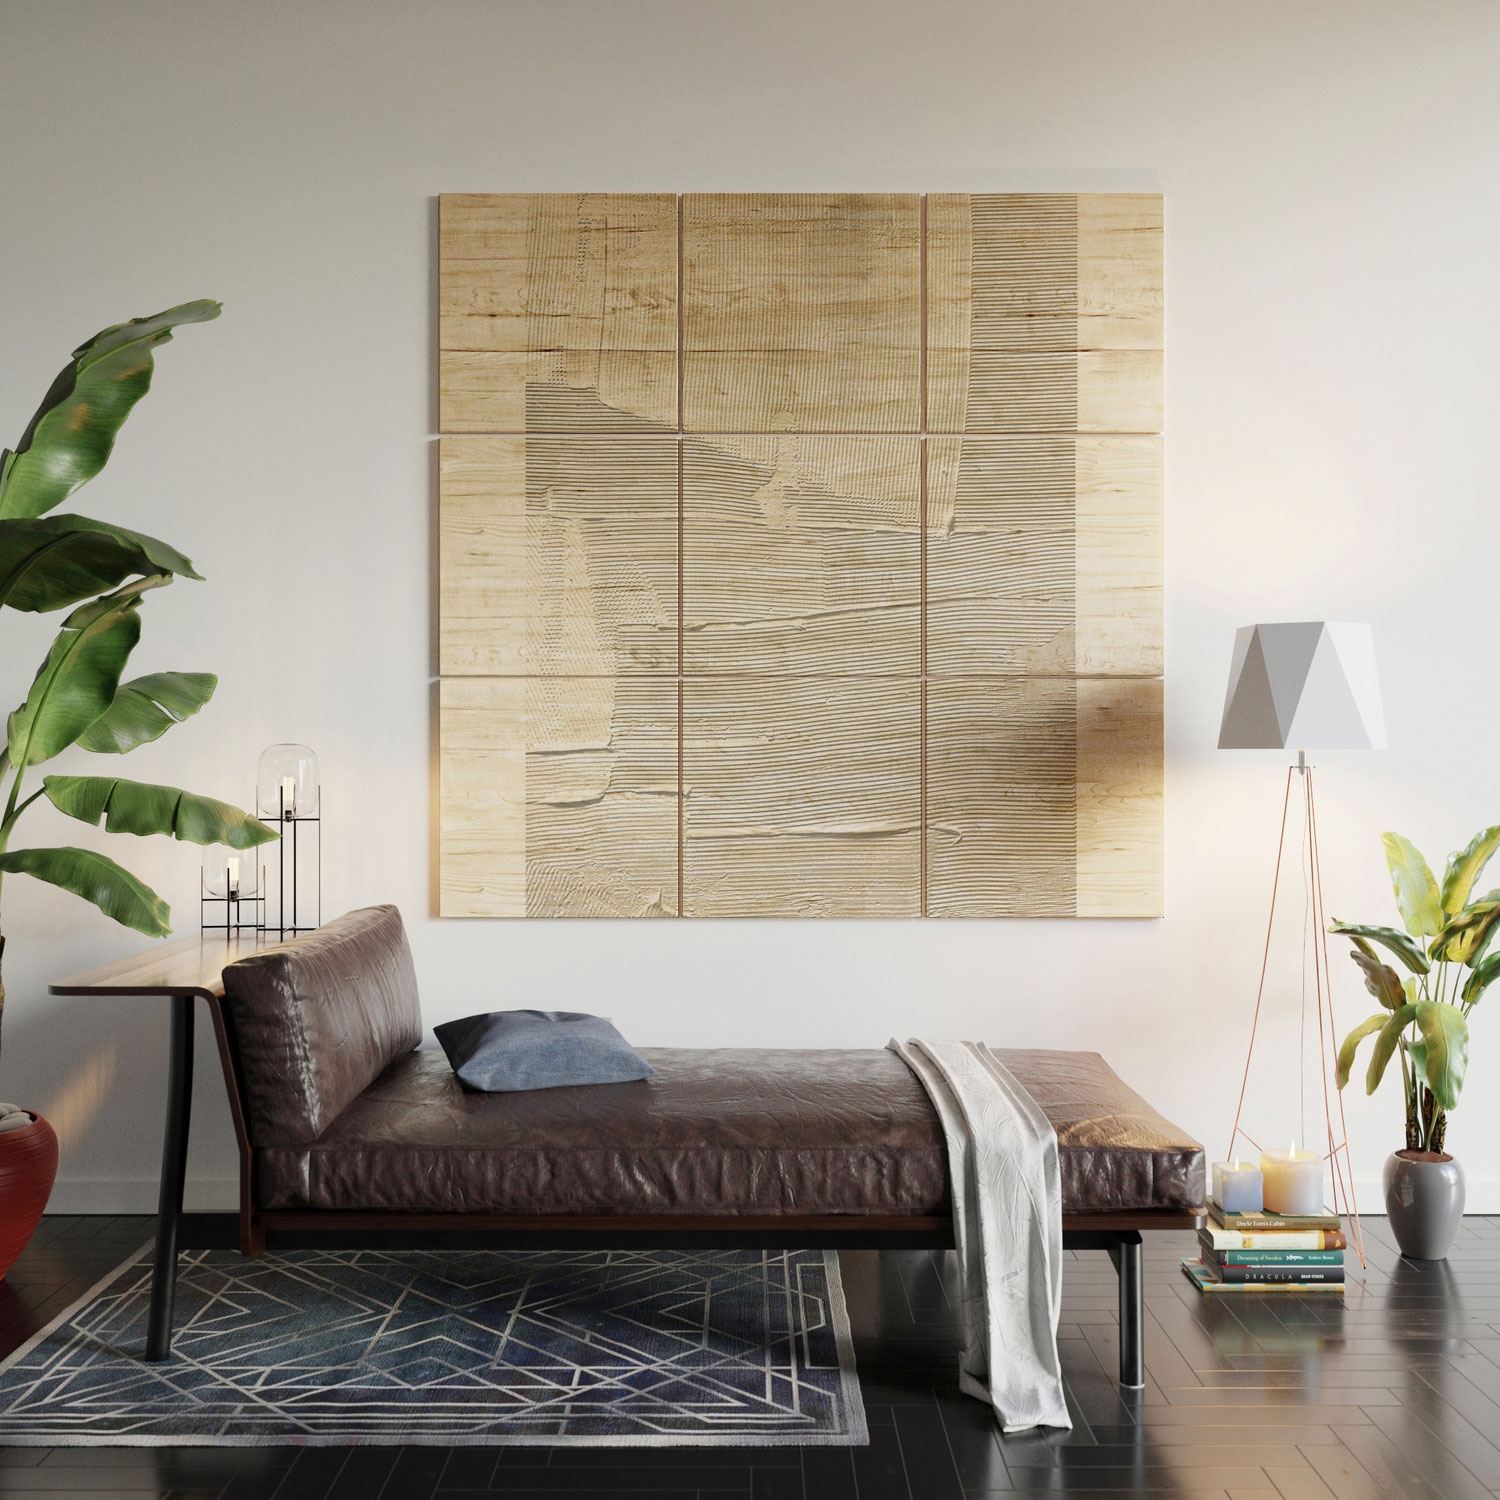 Relief 1 by Alyssa Hamilton Art - Wood Wall Mural5' x 5' (Nine 20" wood Squares) - Image 4